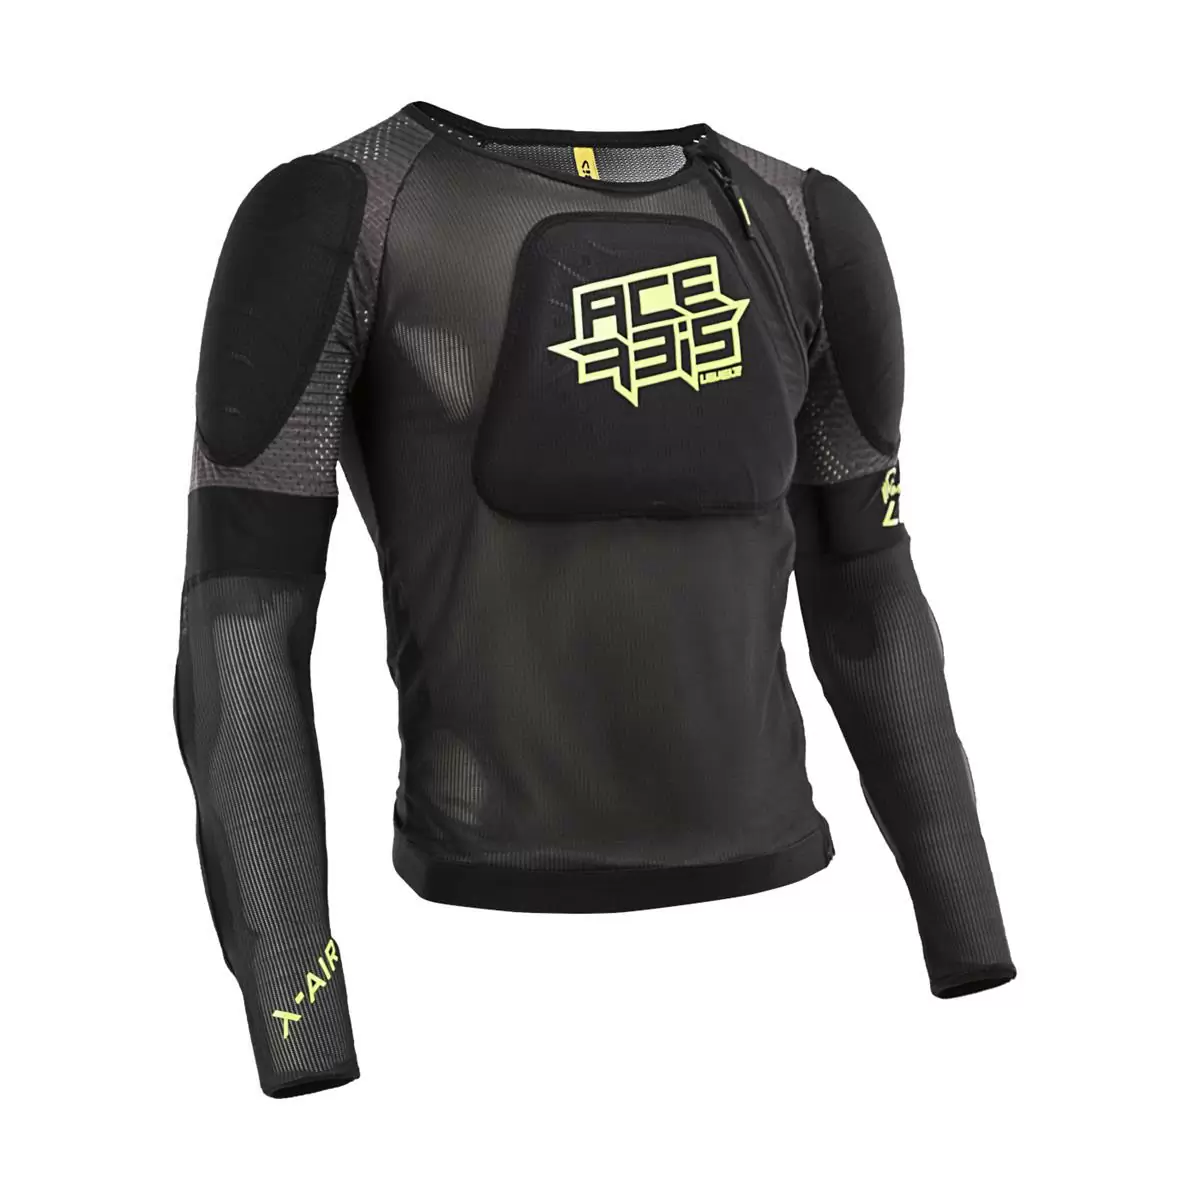 Body Armour X-Air Level 2 Black/Yellow Size L/XL - image